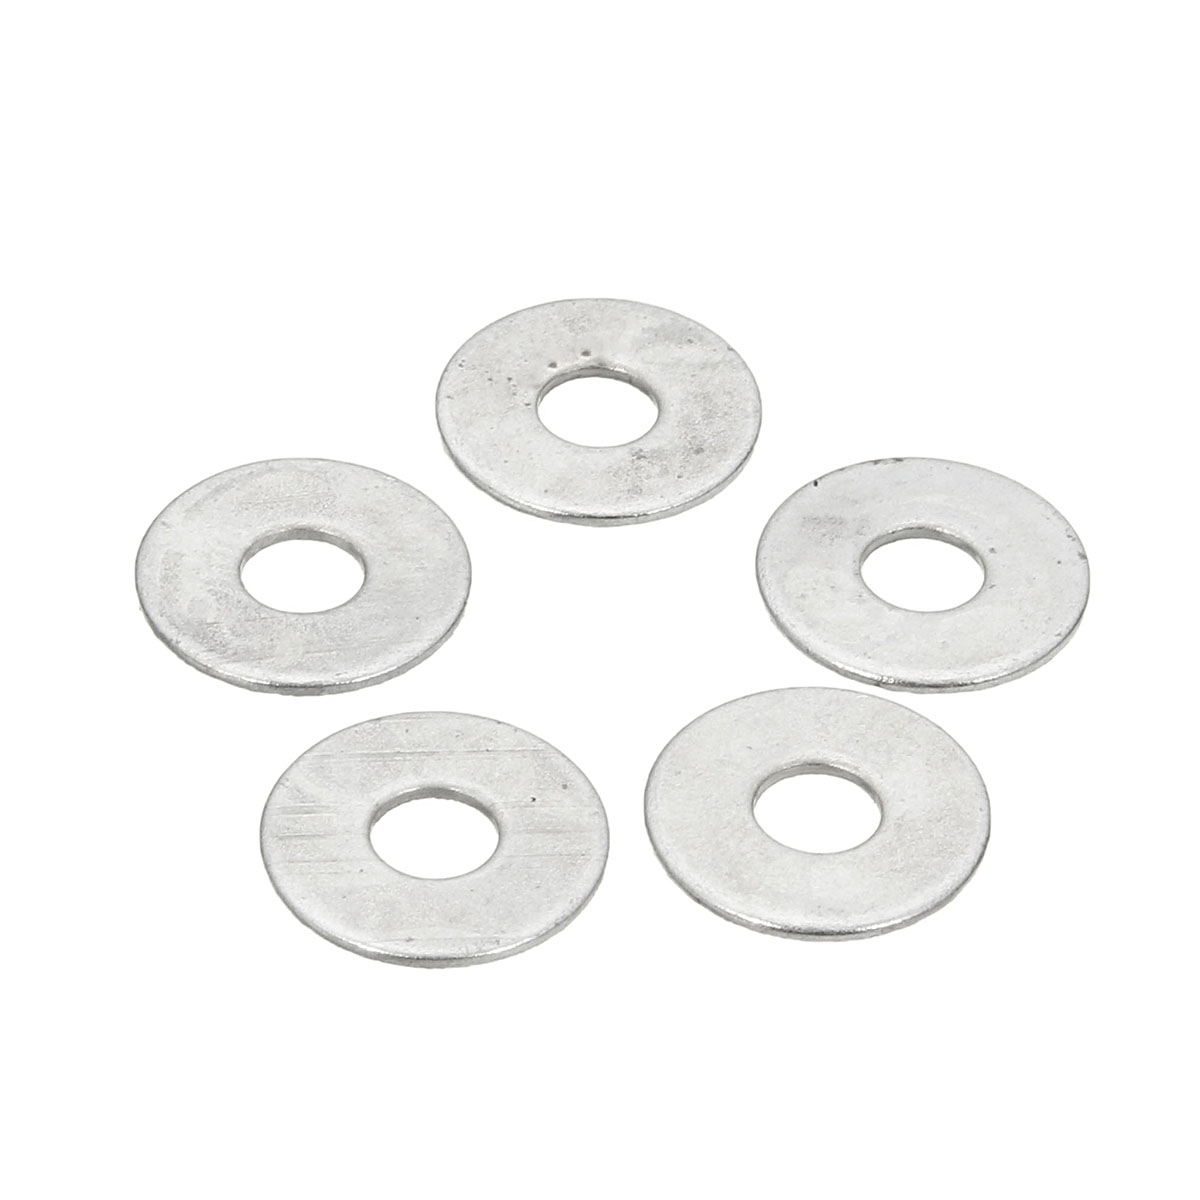 17Pcs Drive Kit Parts Pulley and Motor Mount for 80MM Wheels Electric Skate Board - Auto GoShop